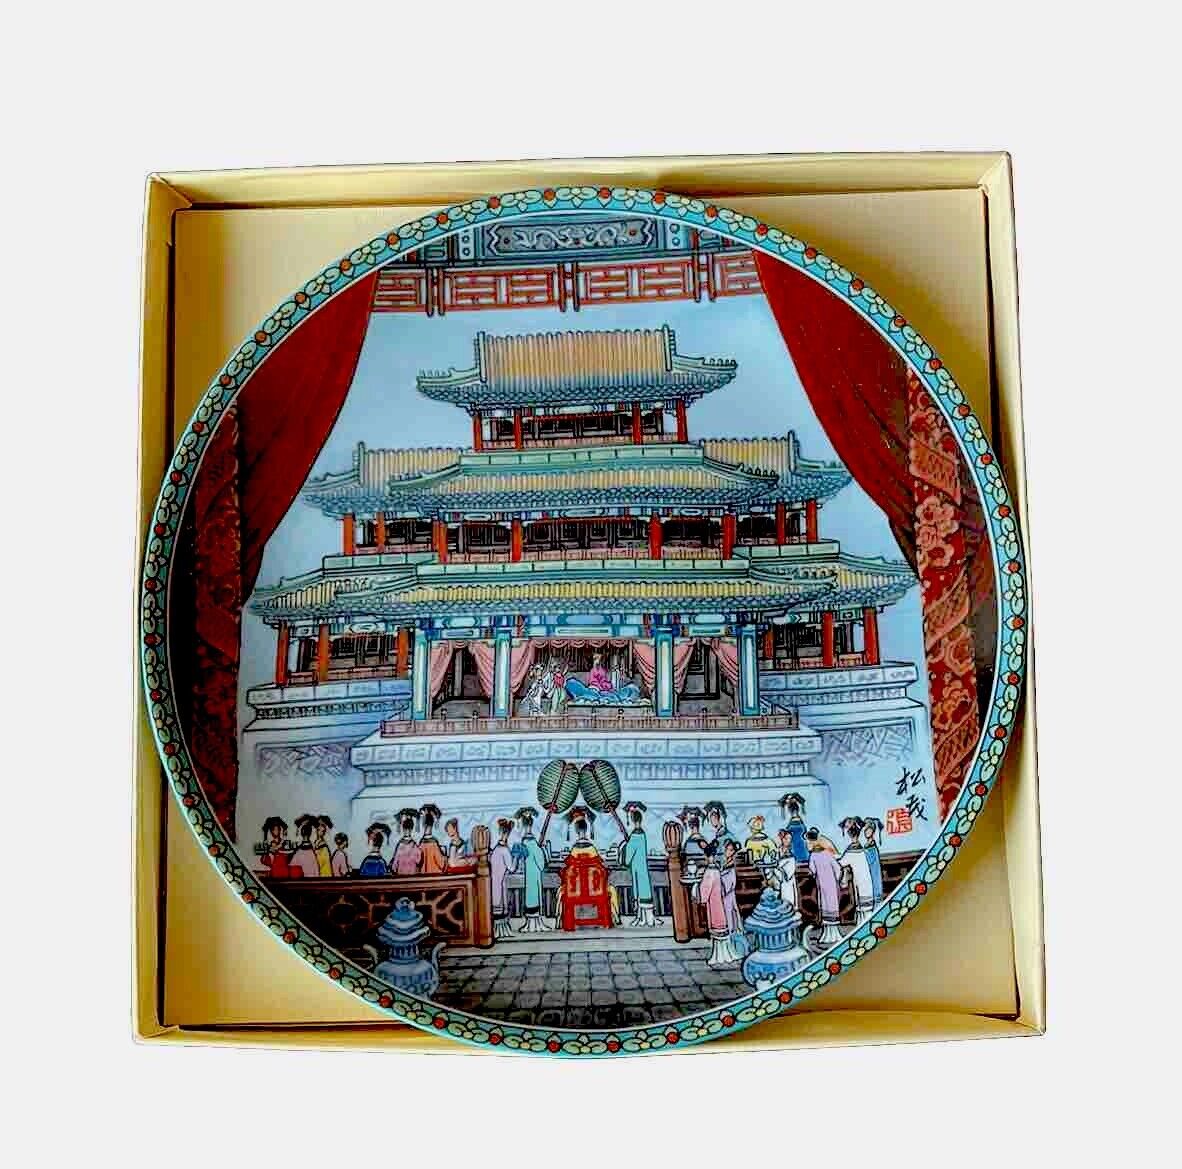 Imperial Jingdezhen Porcelain Plate 6 The Great Stage Summer Palace 1989